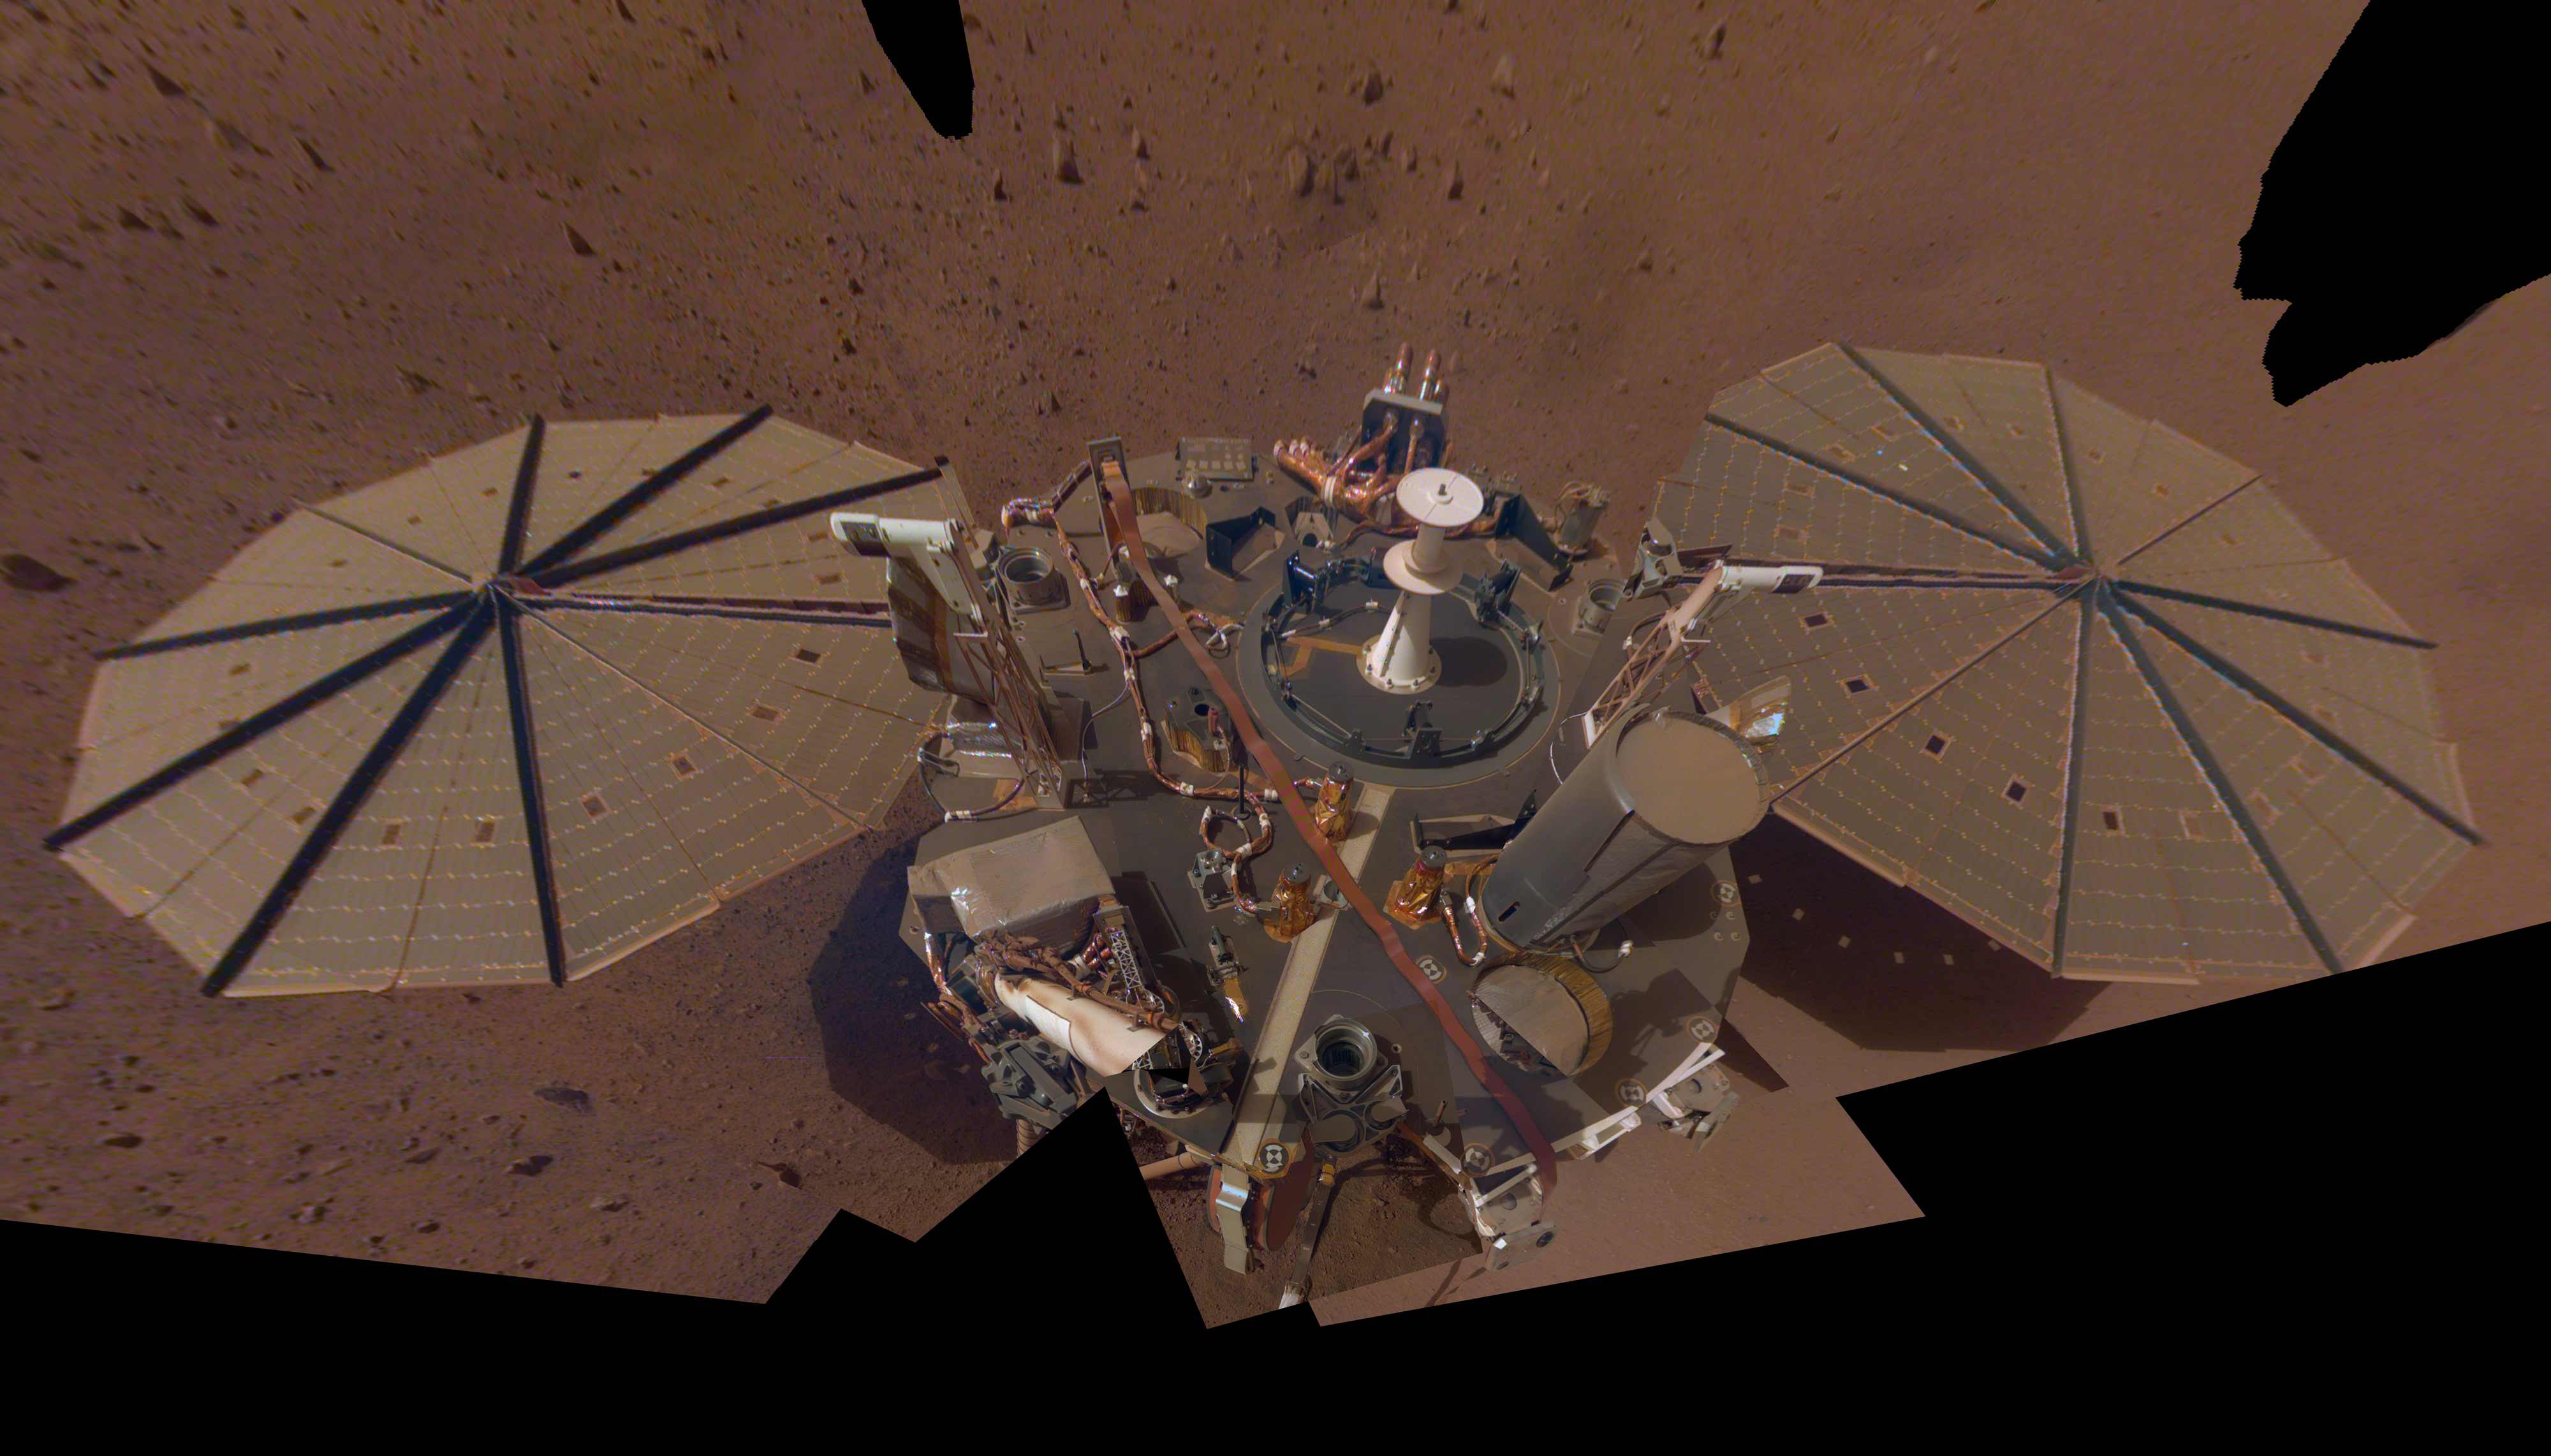 NASA&#39;s <a href="https://www.cnn.com/2022/05/25/world/nasa-mars-insight-lander-final-selfie-scn/index.html" target="_blank">InSight Mars lander</a> poses for its final selfie on April 24. The space agency said in May that InSight would soon cease scientific operations due to decreasing power supply.